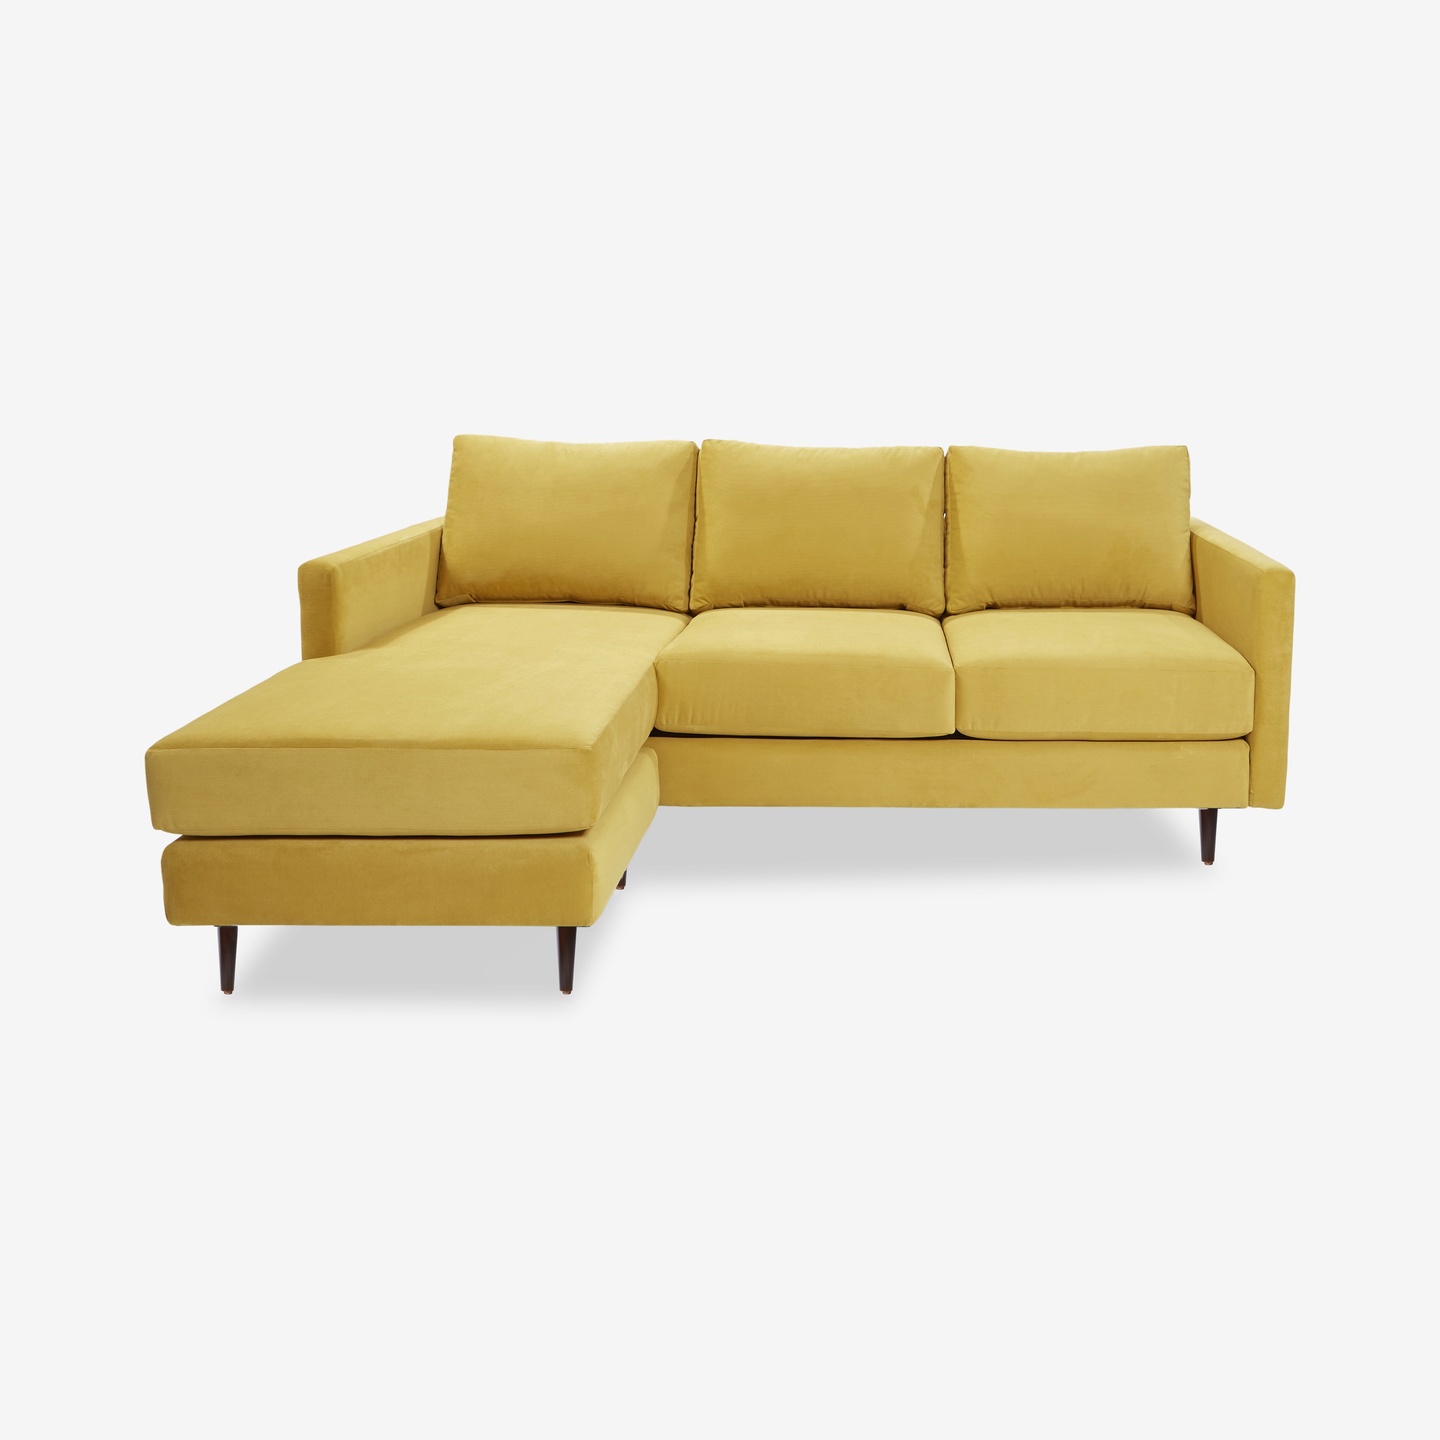 1612_Brooks-Sectional-Convertible-Narrow-Yellow_Front-Left_2022